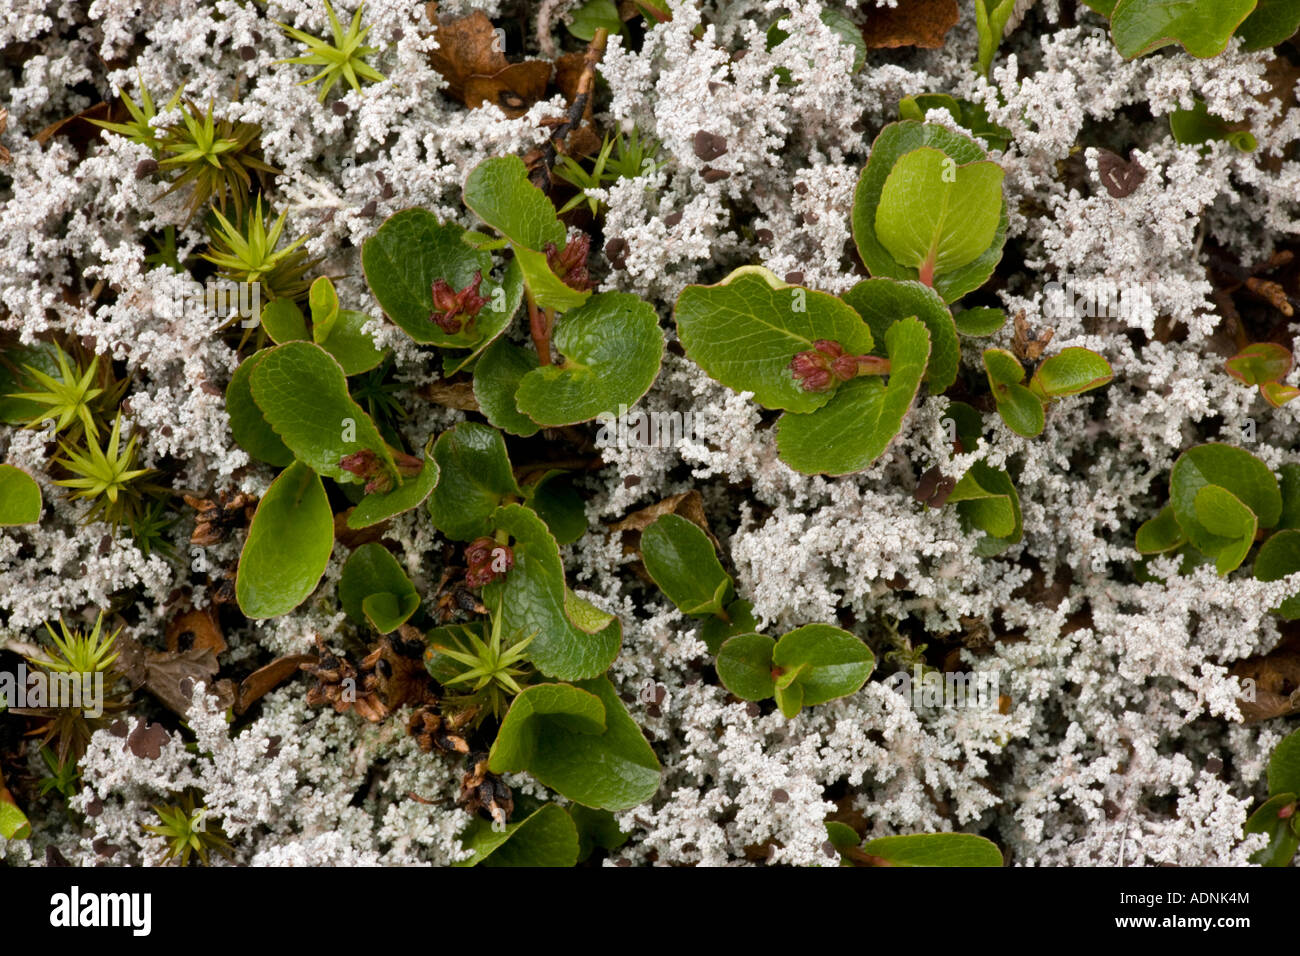 Dwarf willow Salix herbacea in arctic tundra Norway, amongst lichens Stock Photo